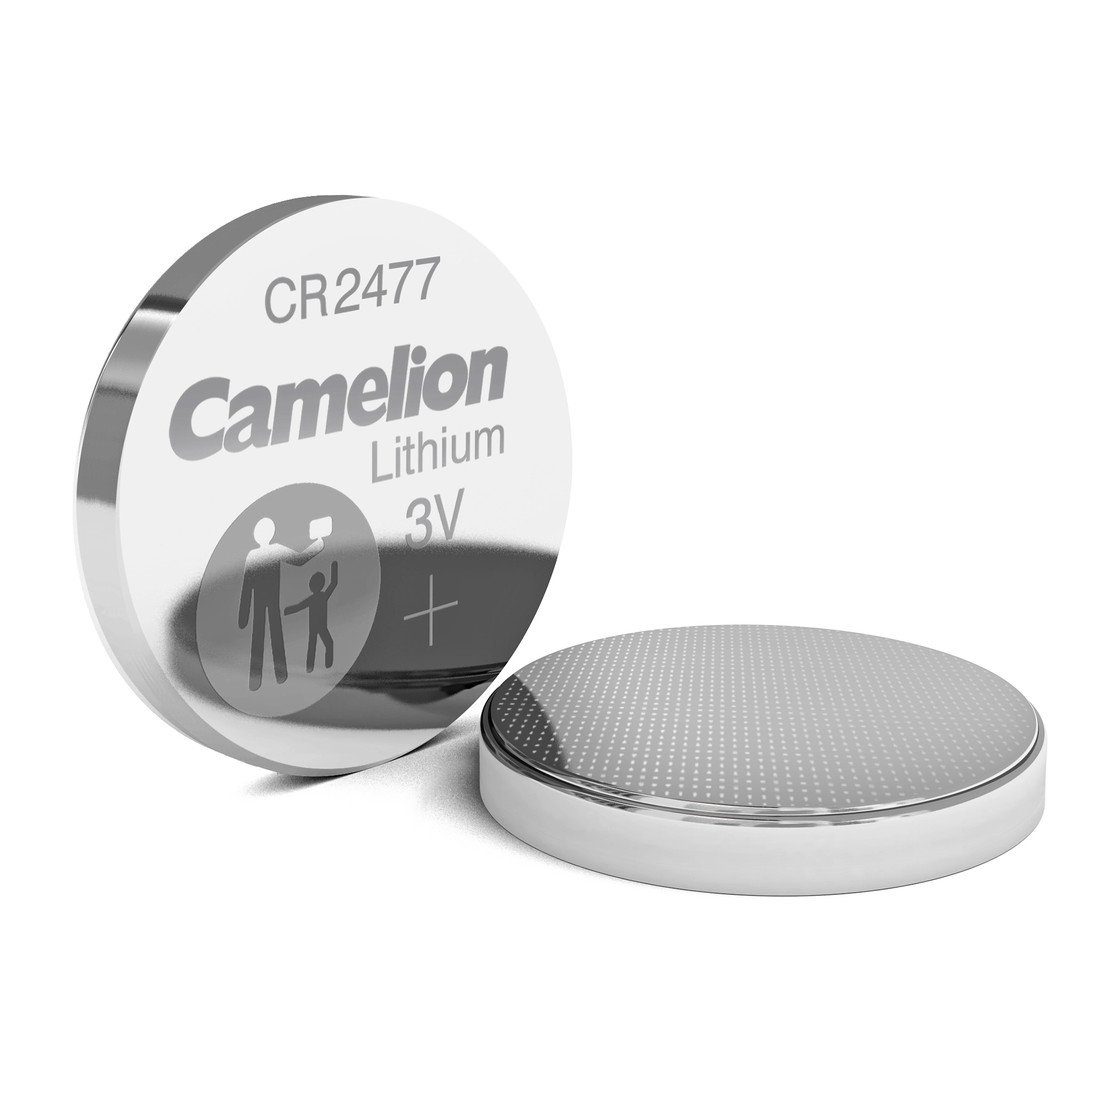 ELECTRONICS gws-powercell Blister Camelion – Alarmanlage Knopfzelle Lithium LUPUS CR2477 3 ® V